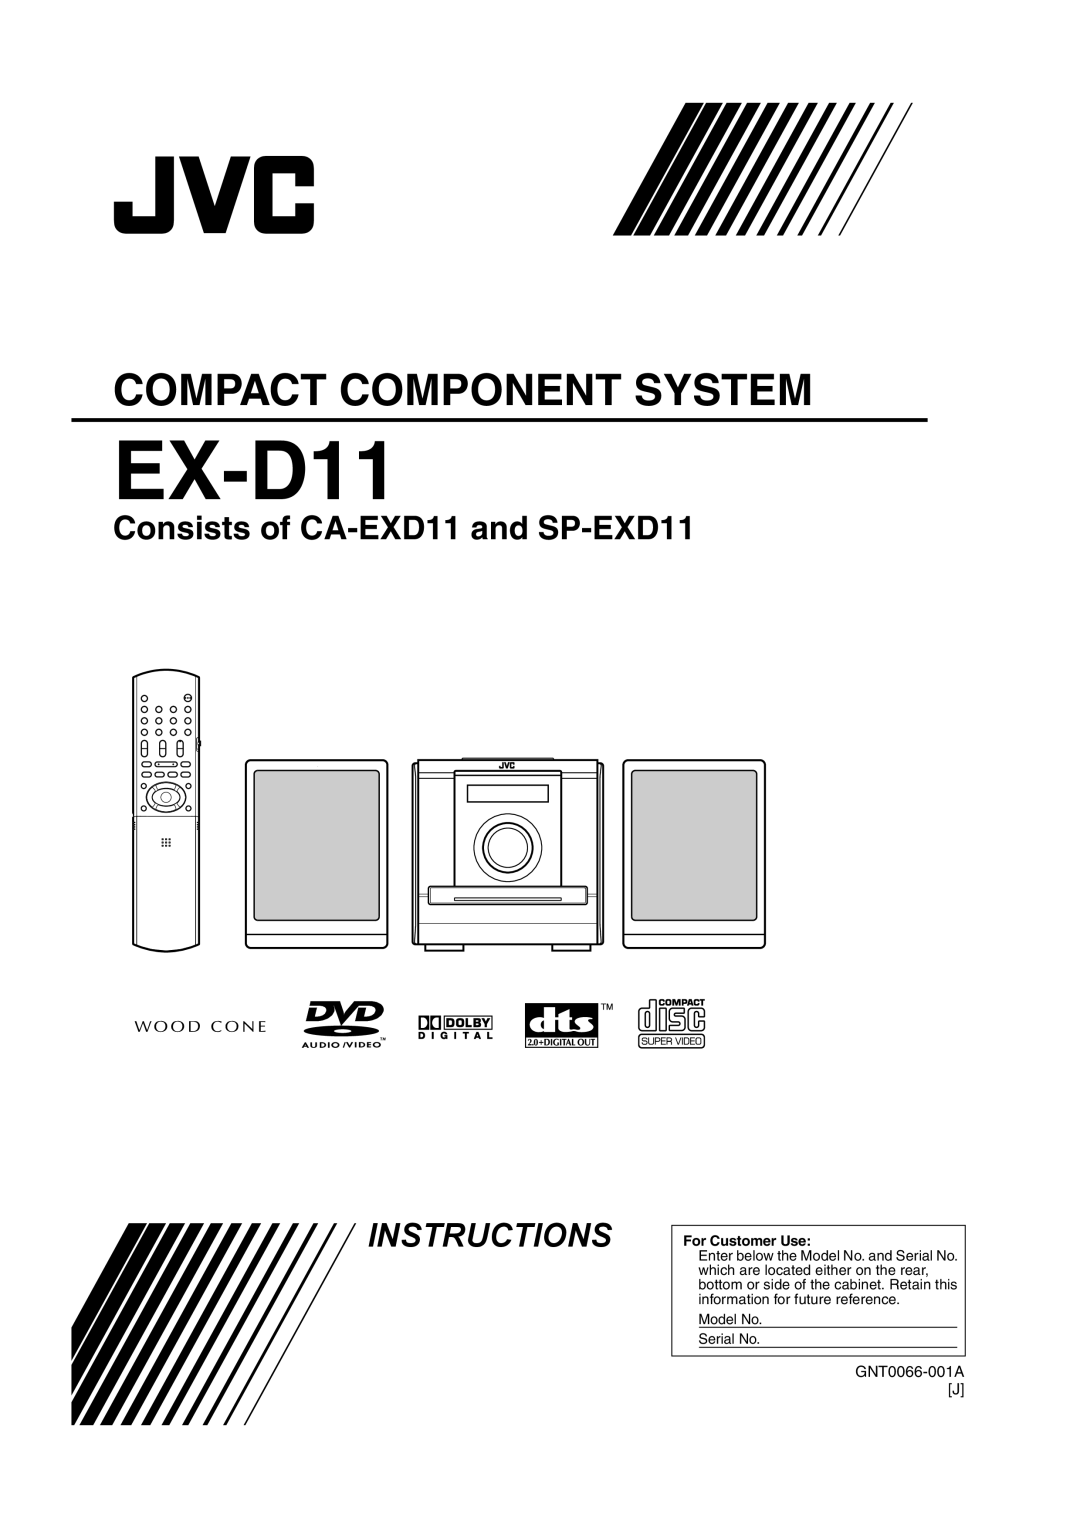 JVC EX-D11 manual Compact Component System, Consists of CA-EXD11and SP-EXD11, Instructions 